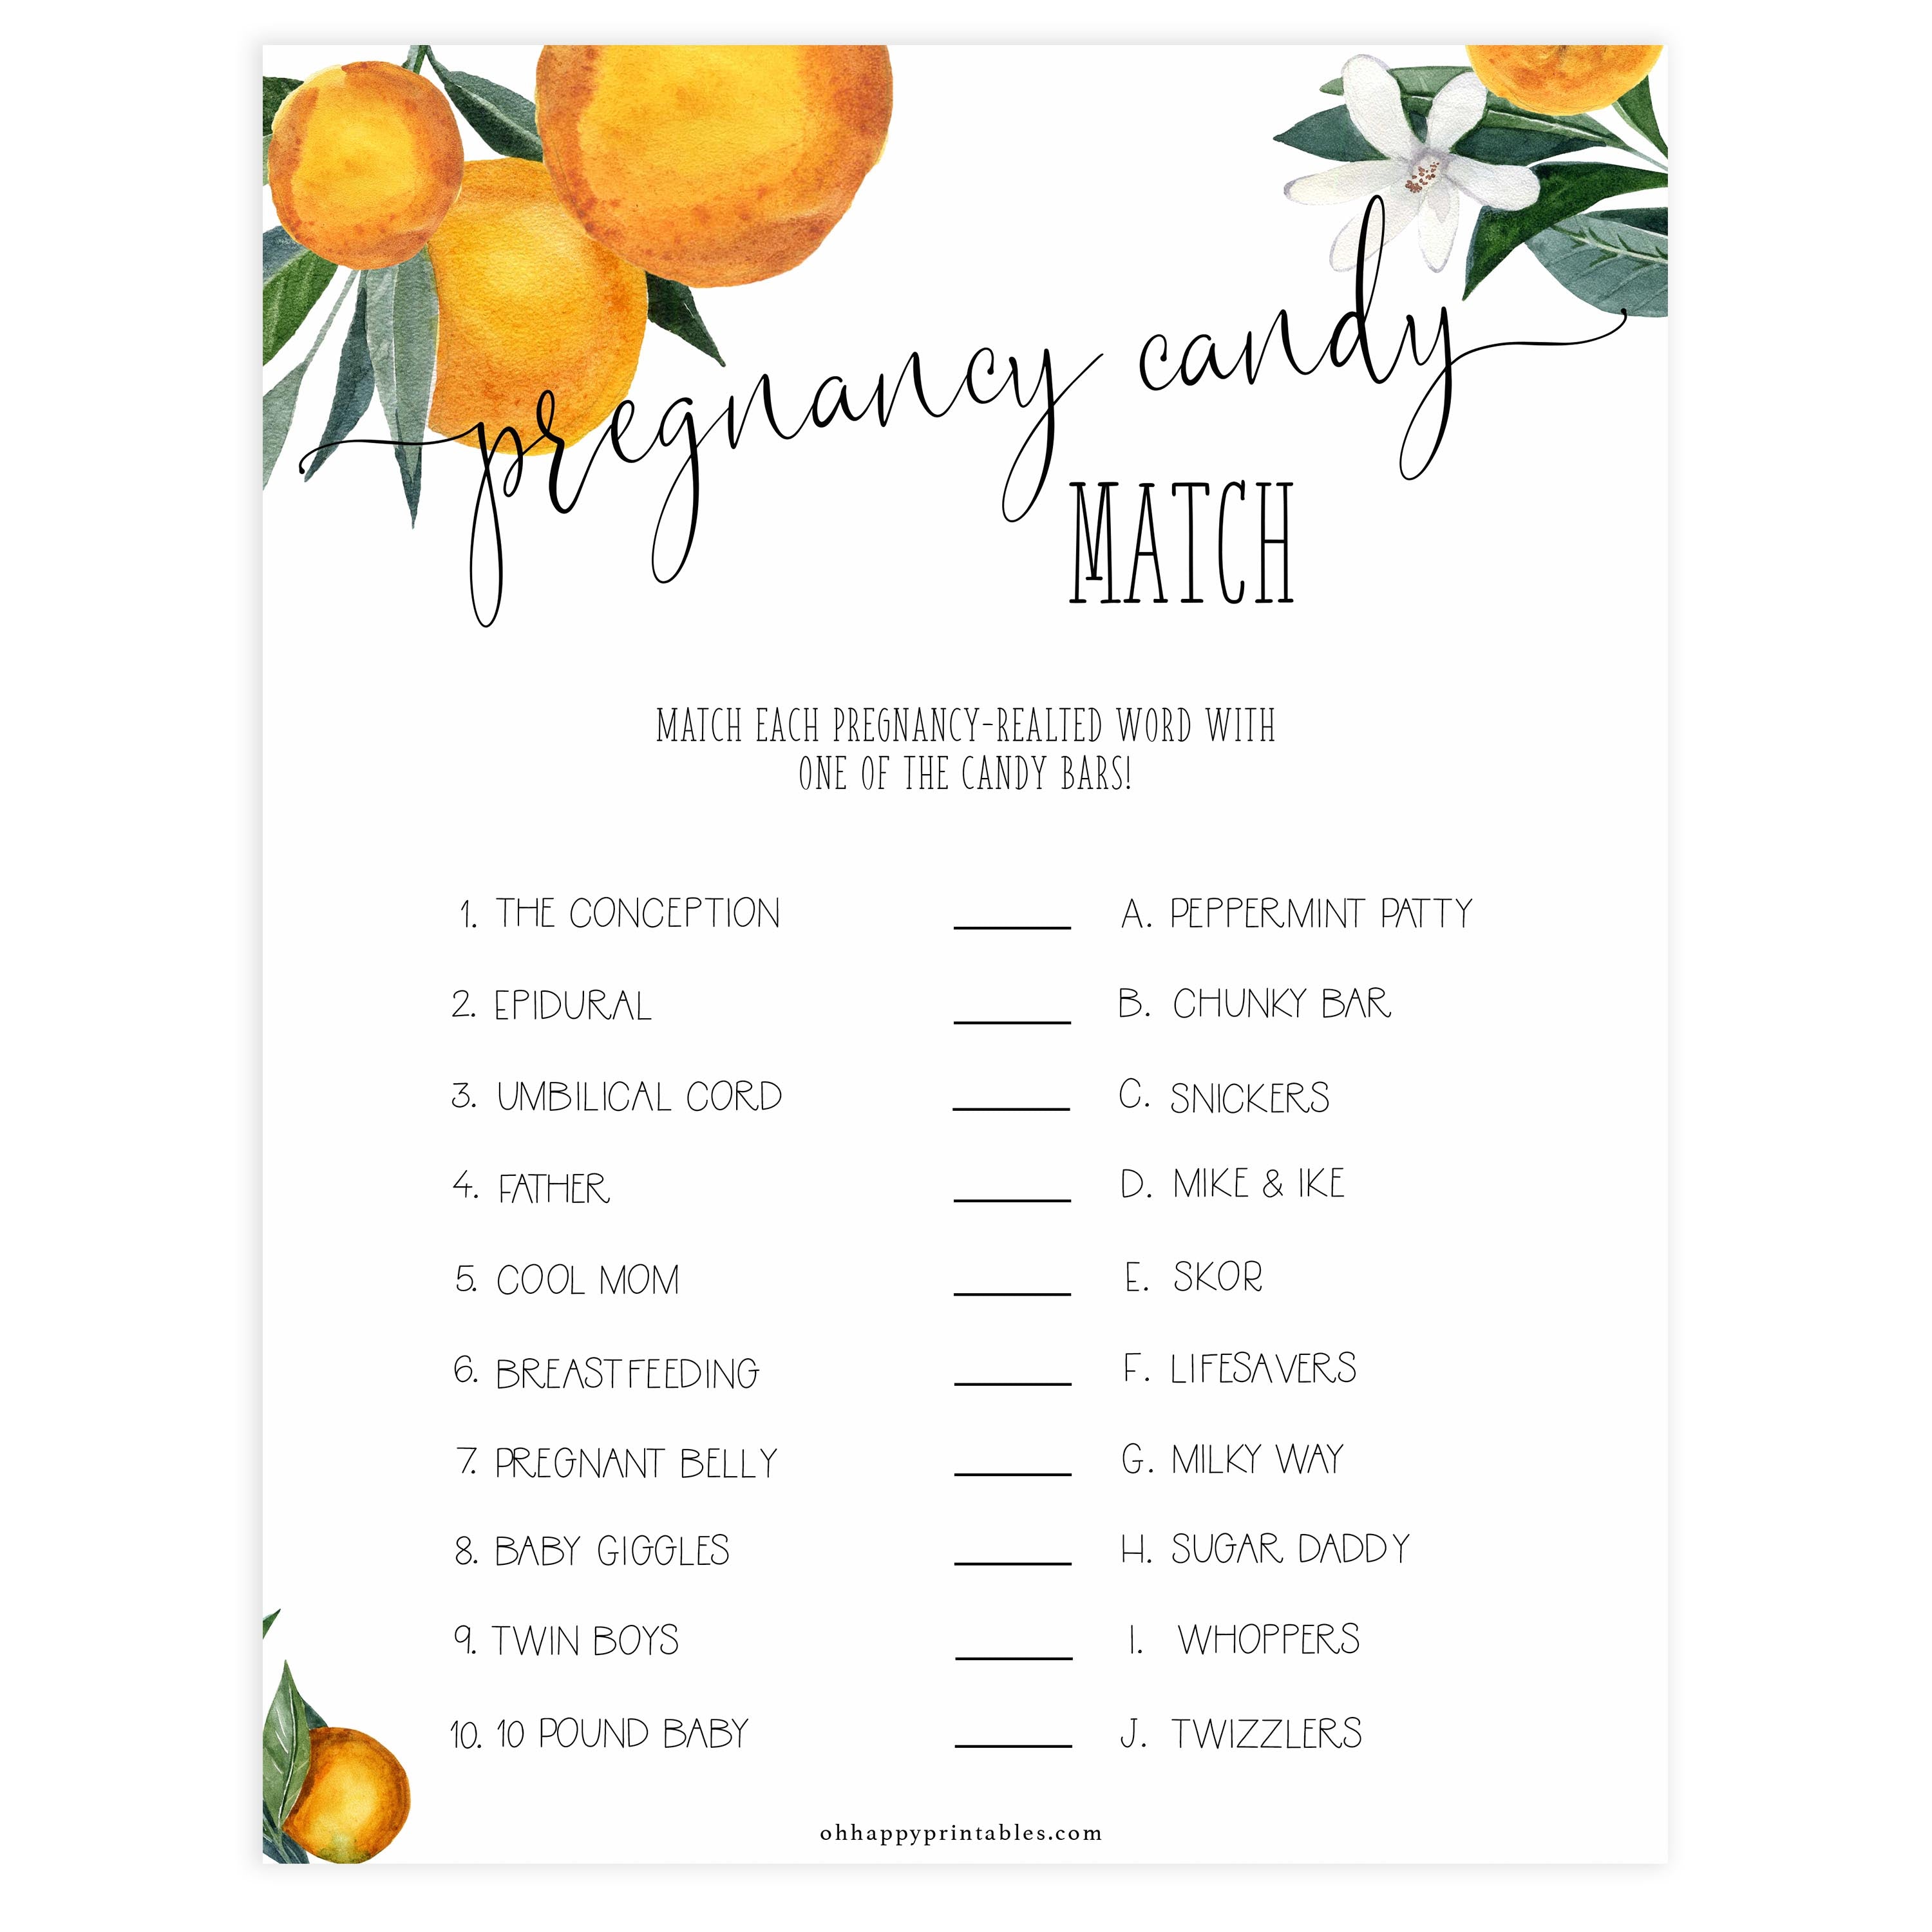 pregnancy candy match game, Printable baby shower games, little cutie baby games, baby shower games, fun baby shower ideas, top baby shower ideas, little cutie baby shower, baby shower games, fun little cutie baby shower ideas, citrus baby shower games, citrus baby shower, orange baby shower  Little cutie baby game, Little cutie baby shower, Little cutie games, Little cutie baby games, Little cutie, Little cutie printable baby games, Citrus baby shower, Orange baby shower, Citrus orange baby shower,